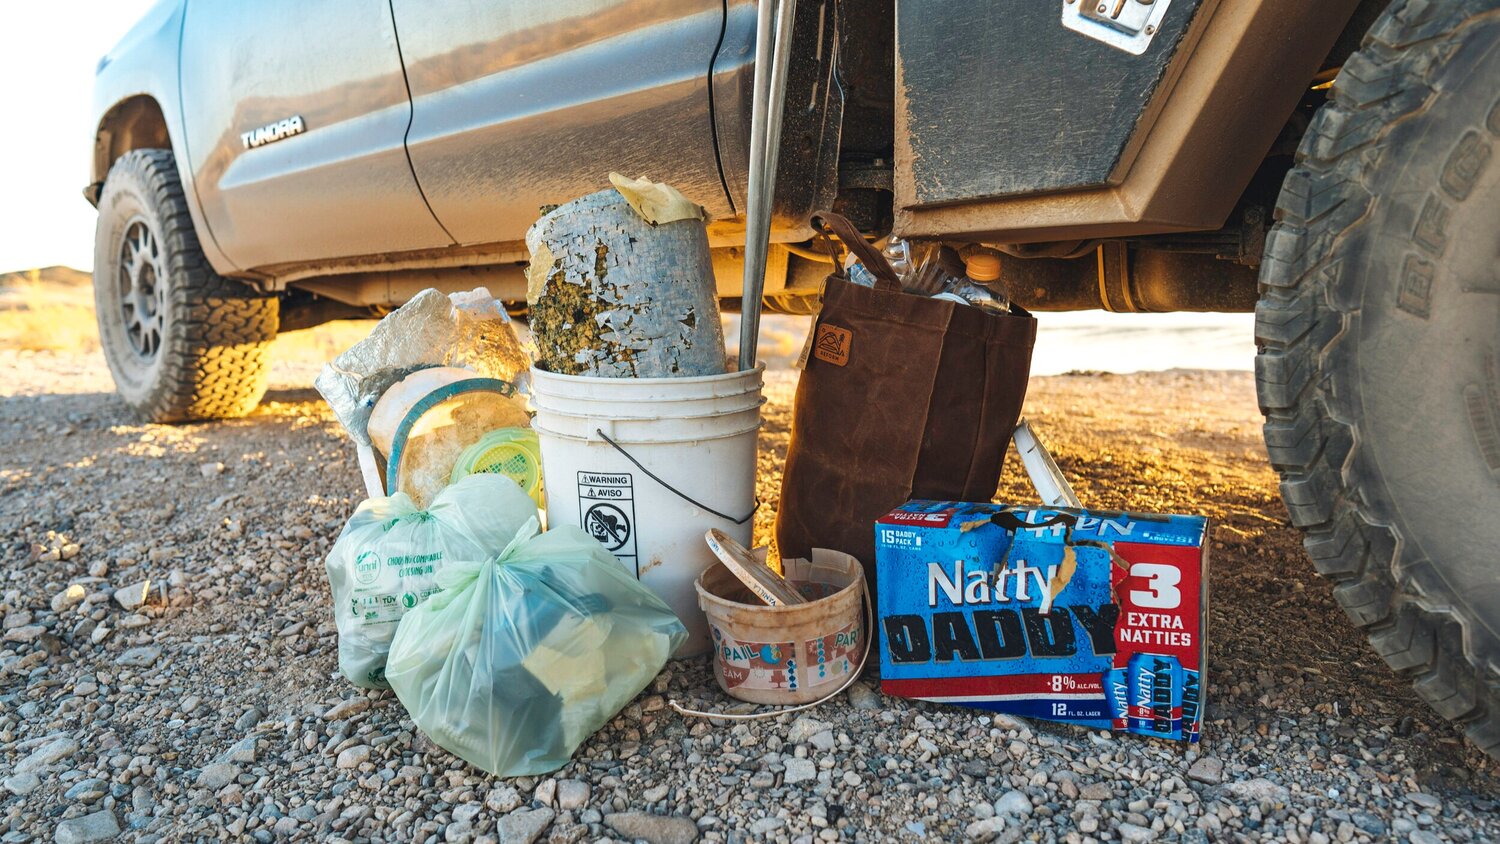 Trash collected at Lake Mead National Recreation Area, NV